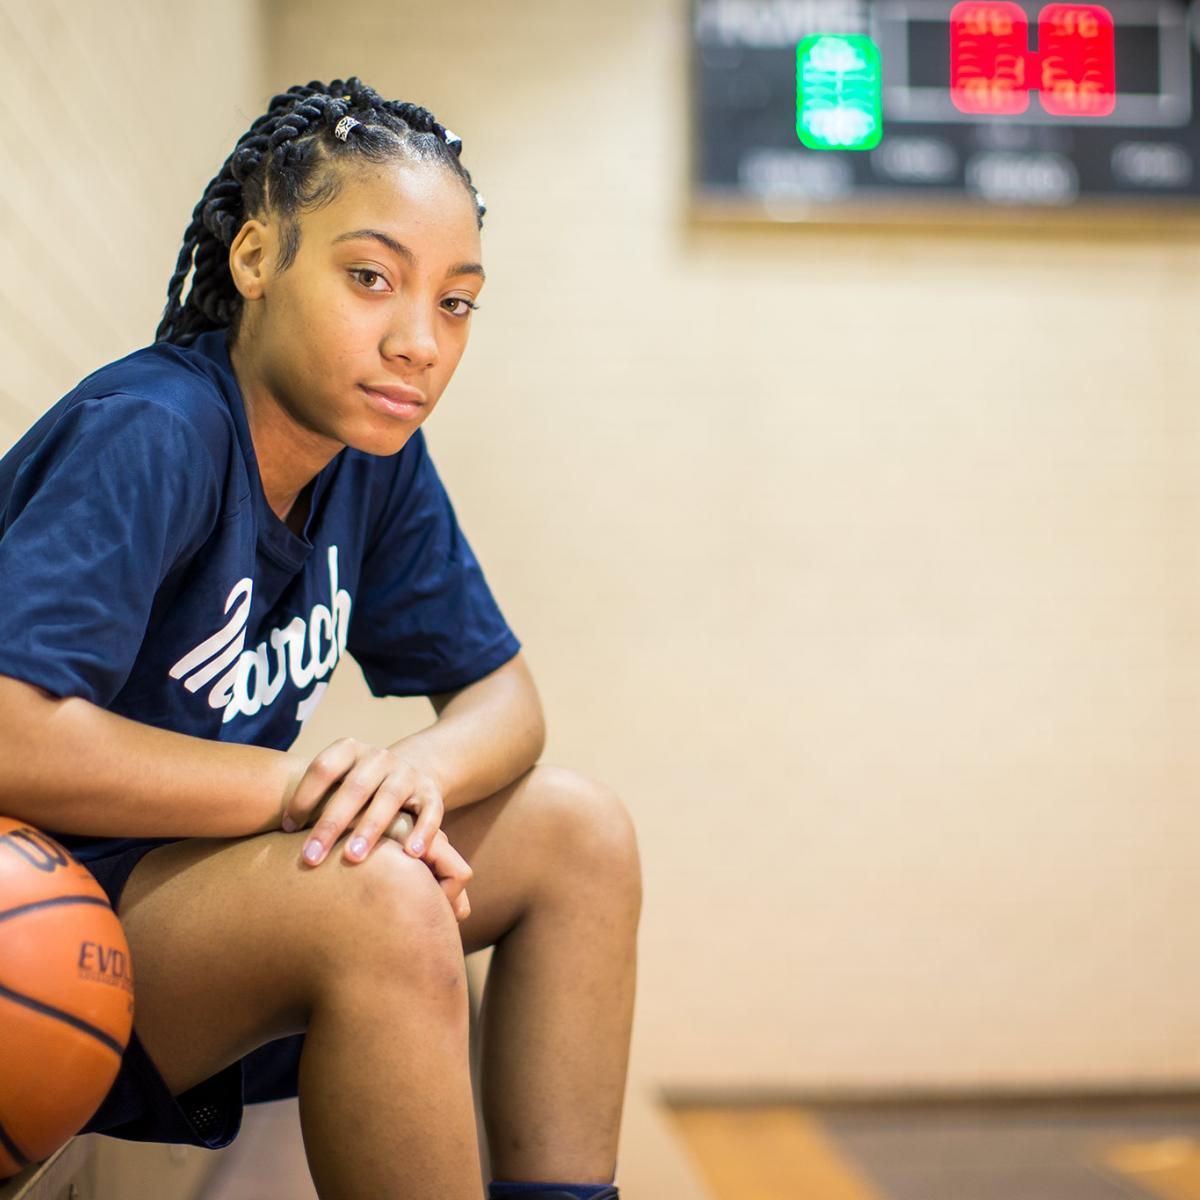 For Mo'ne Davis, her first year at Hampton was a winner, though it